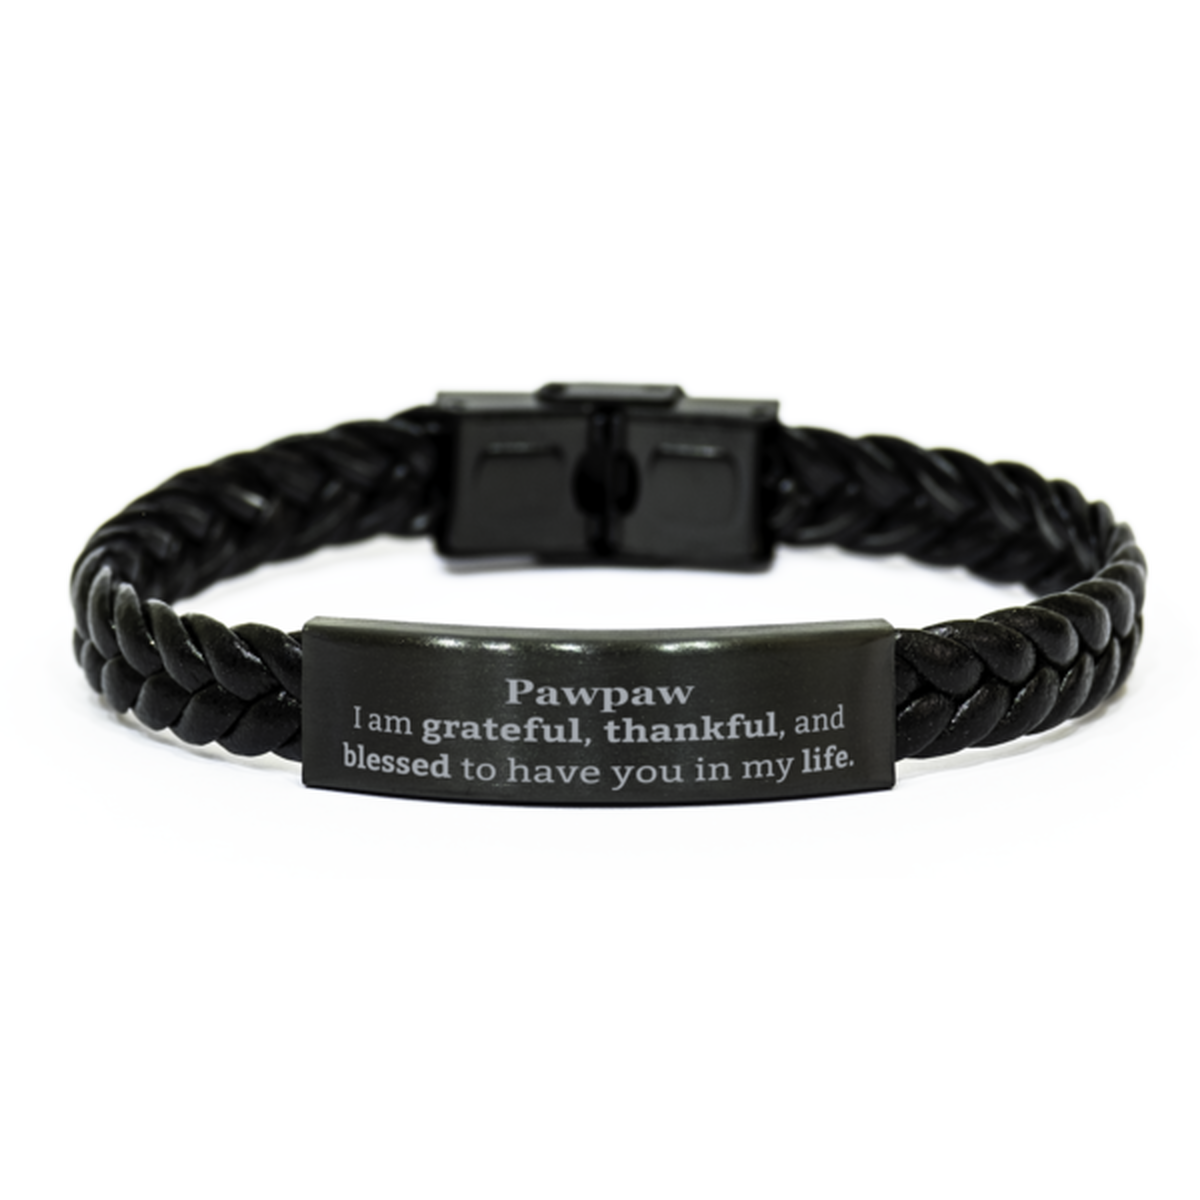 Pawpaw Appreciation Gifts, I am grateful, thankful, and blessed, Thank You Braided Leather Bracelet for Pawpaw, Birthday Inspiration Gifts for Pawpaw